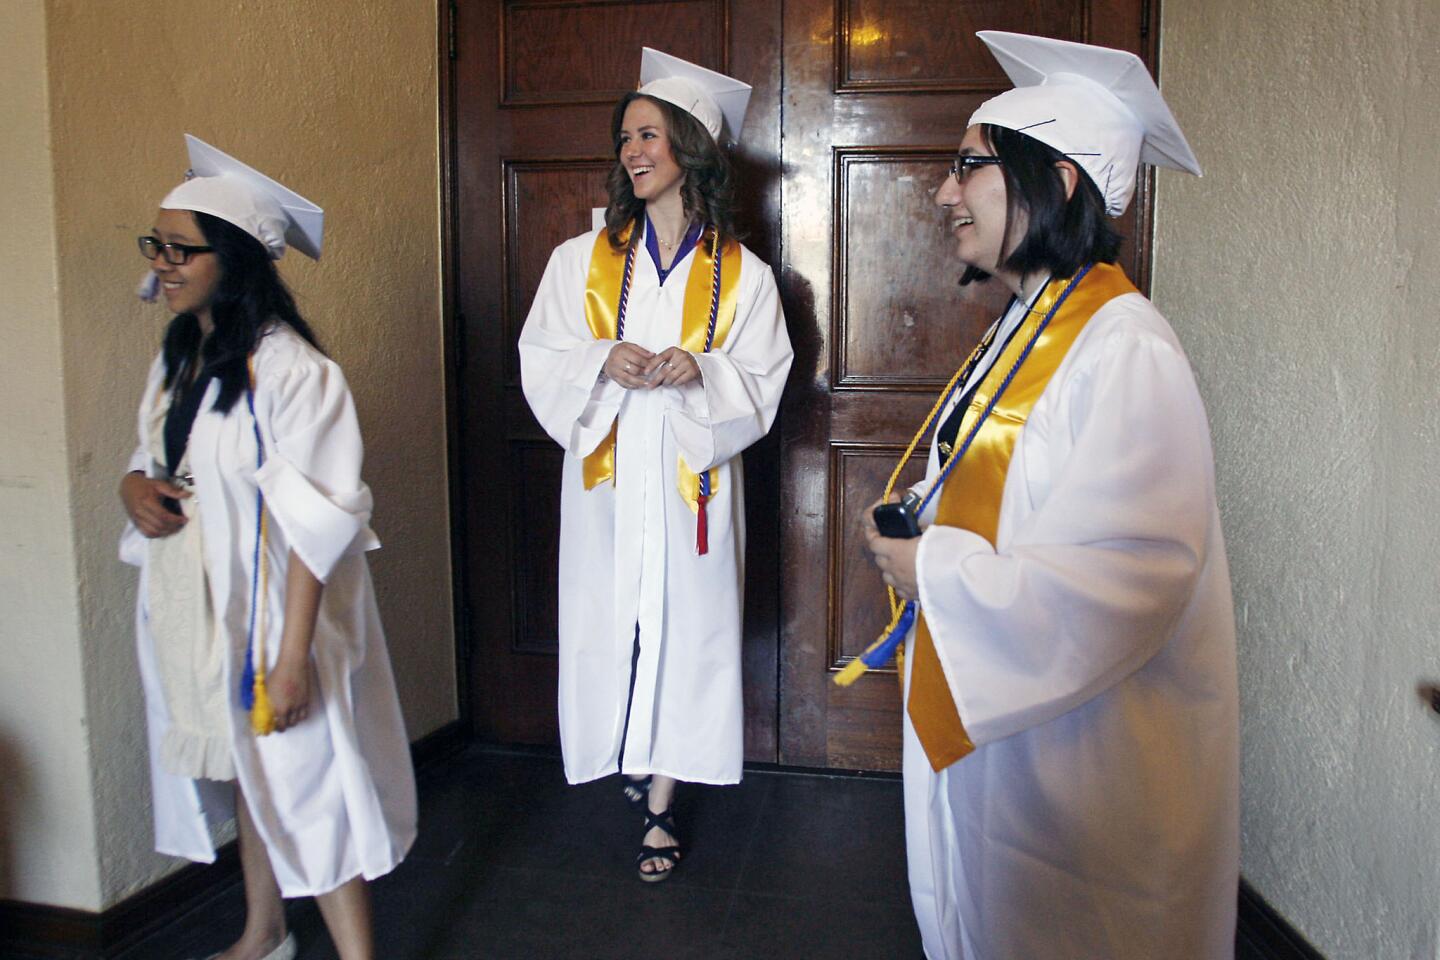 Hoover's An Uong, 17, from left, Ashley mcClure, 18, and Fiona Babakhanians, 18, wait in the auditorium before their graduation ceremony begins, which took place at Hoover High School in Glendale on Thursday, June 14, 2012.